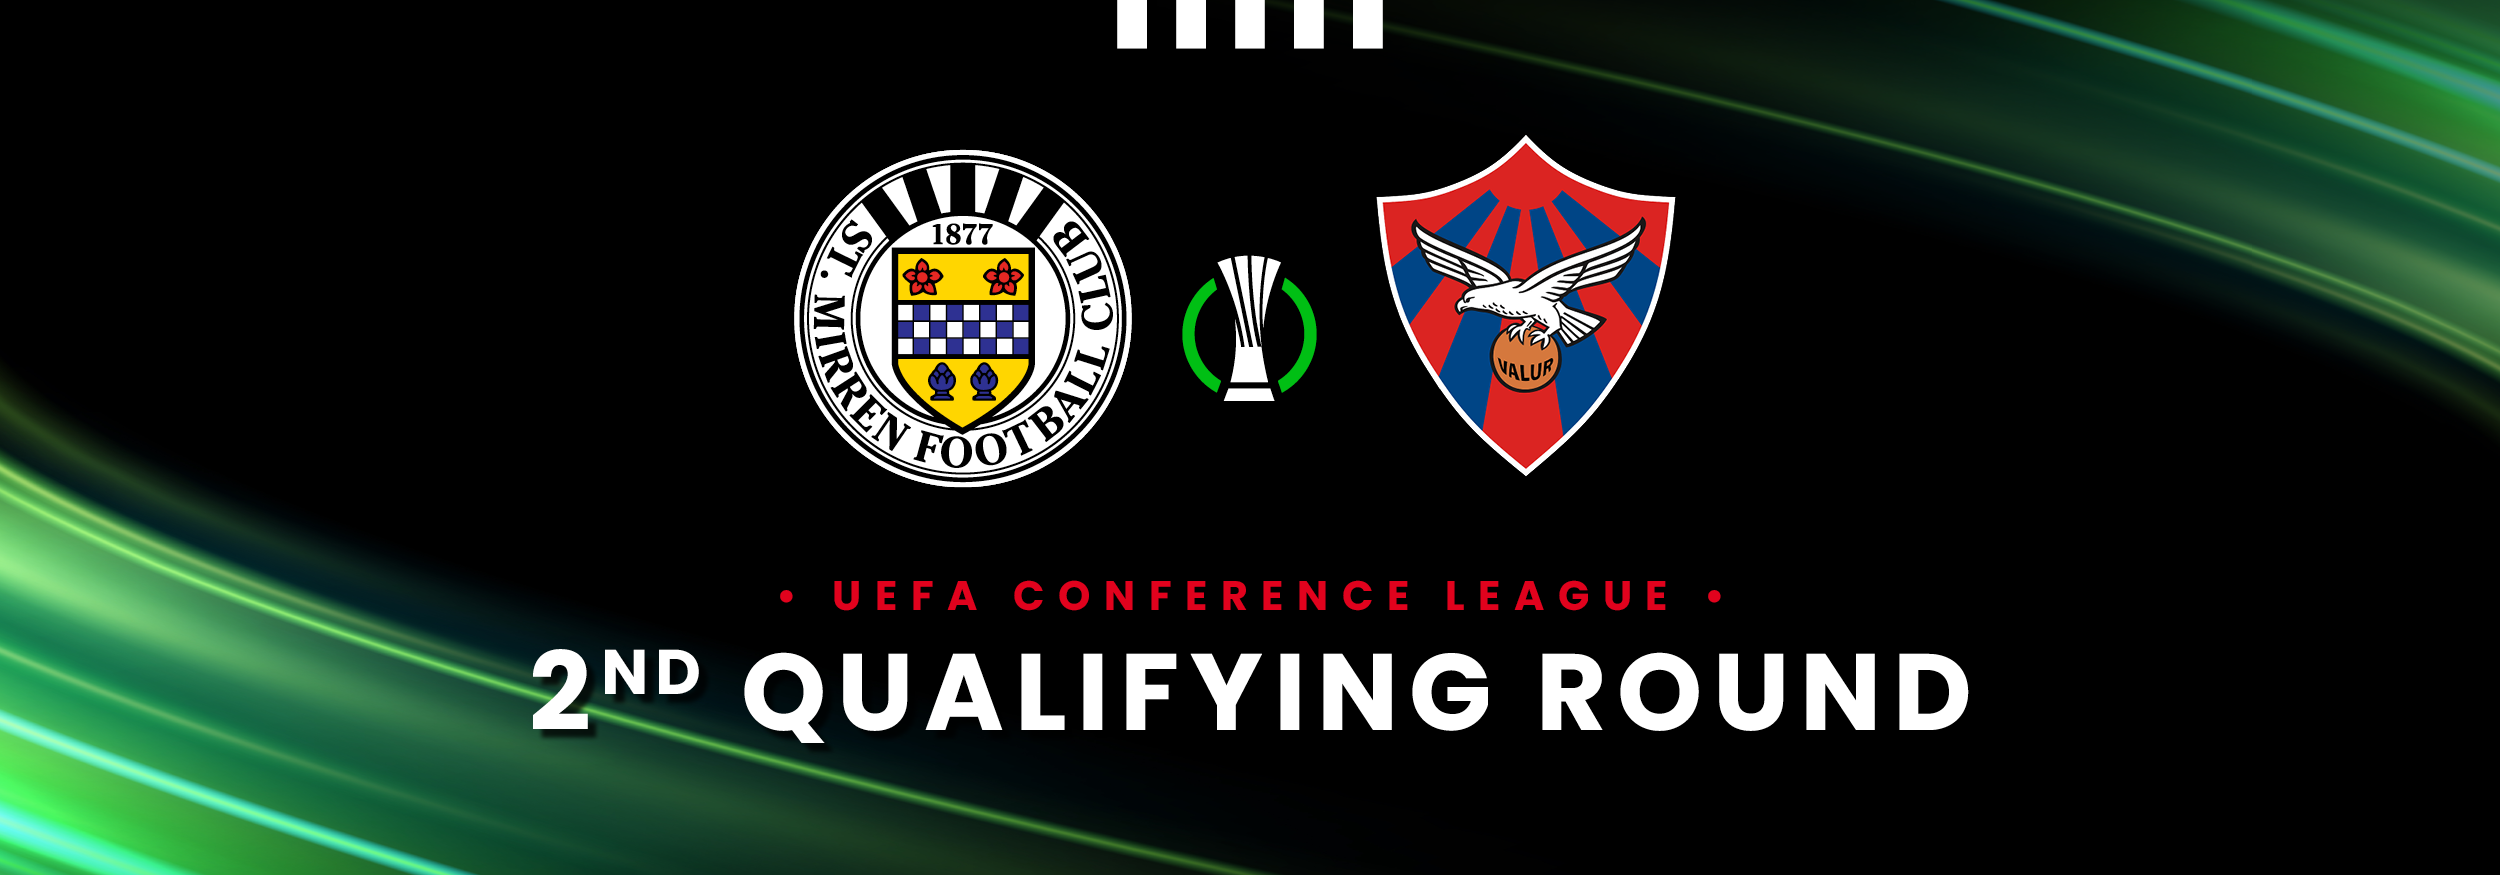 Iceland it is | St Mirren to face Valur FC in UEFA Conference League